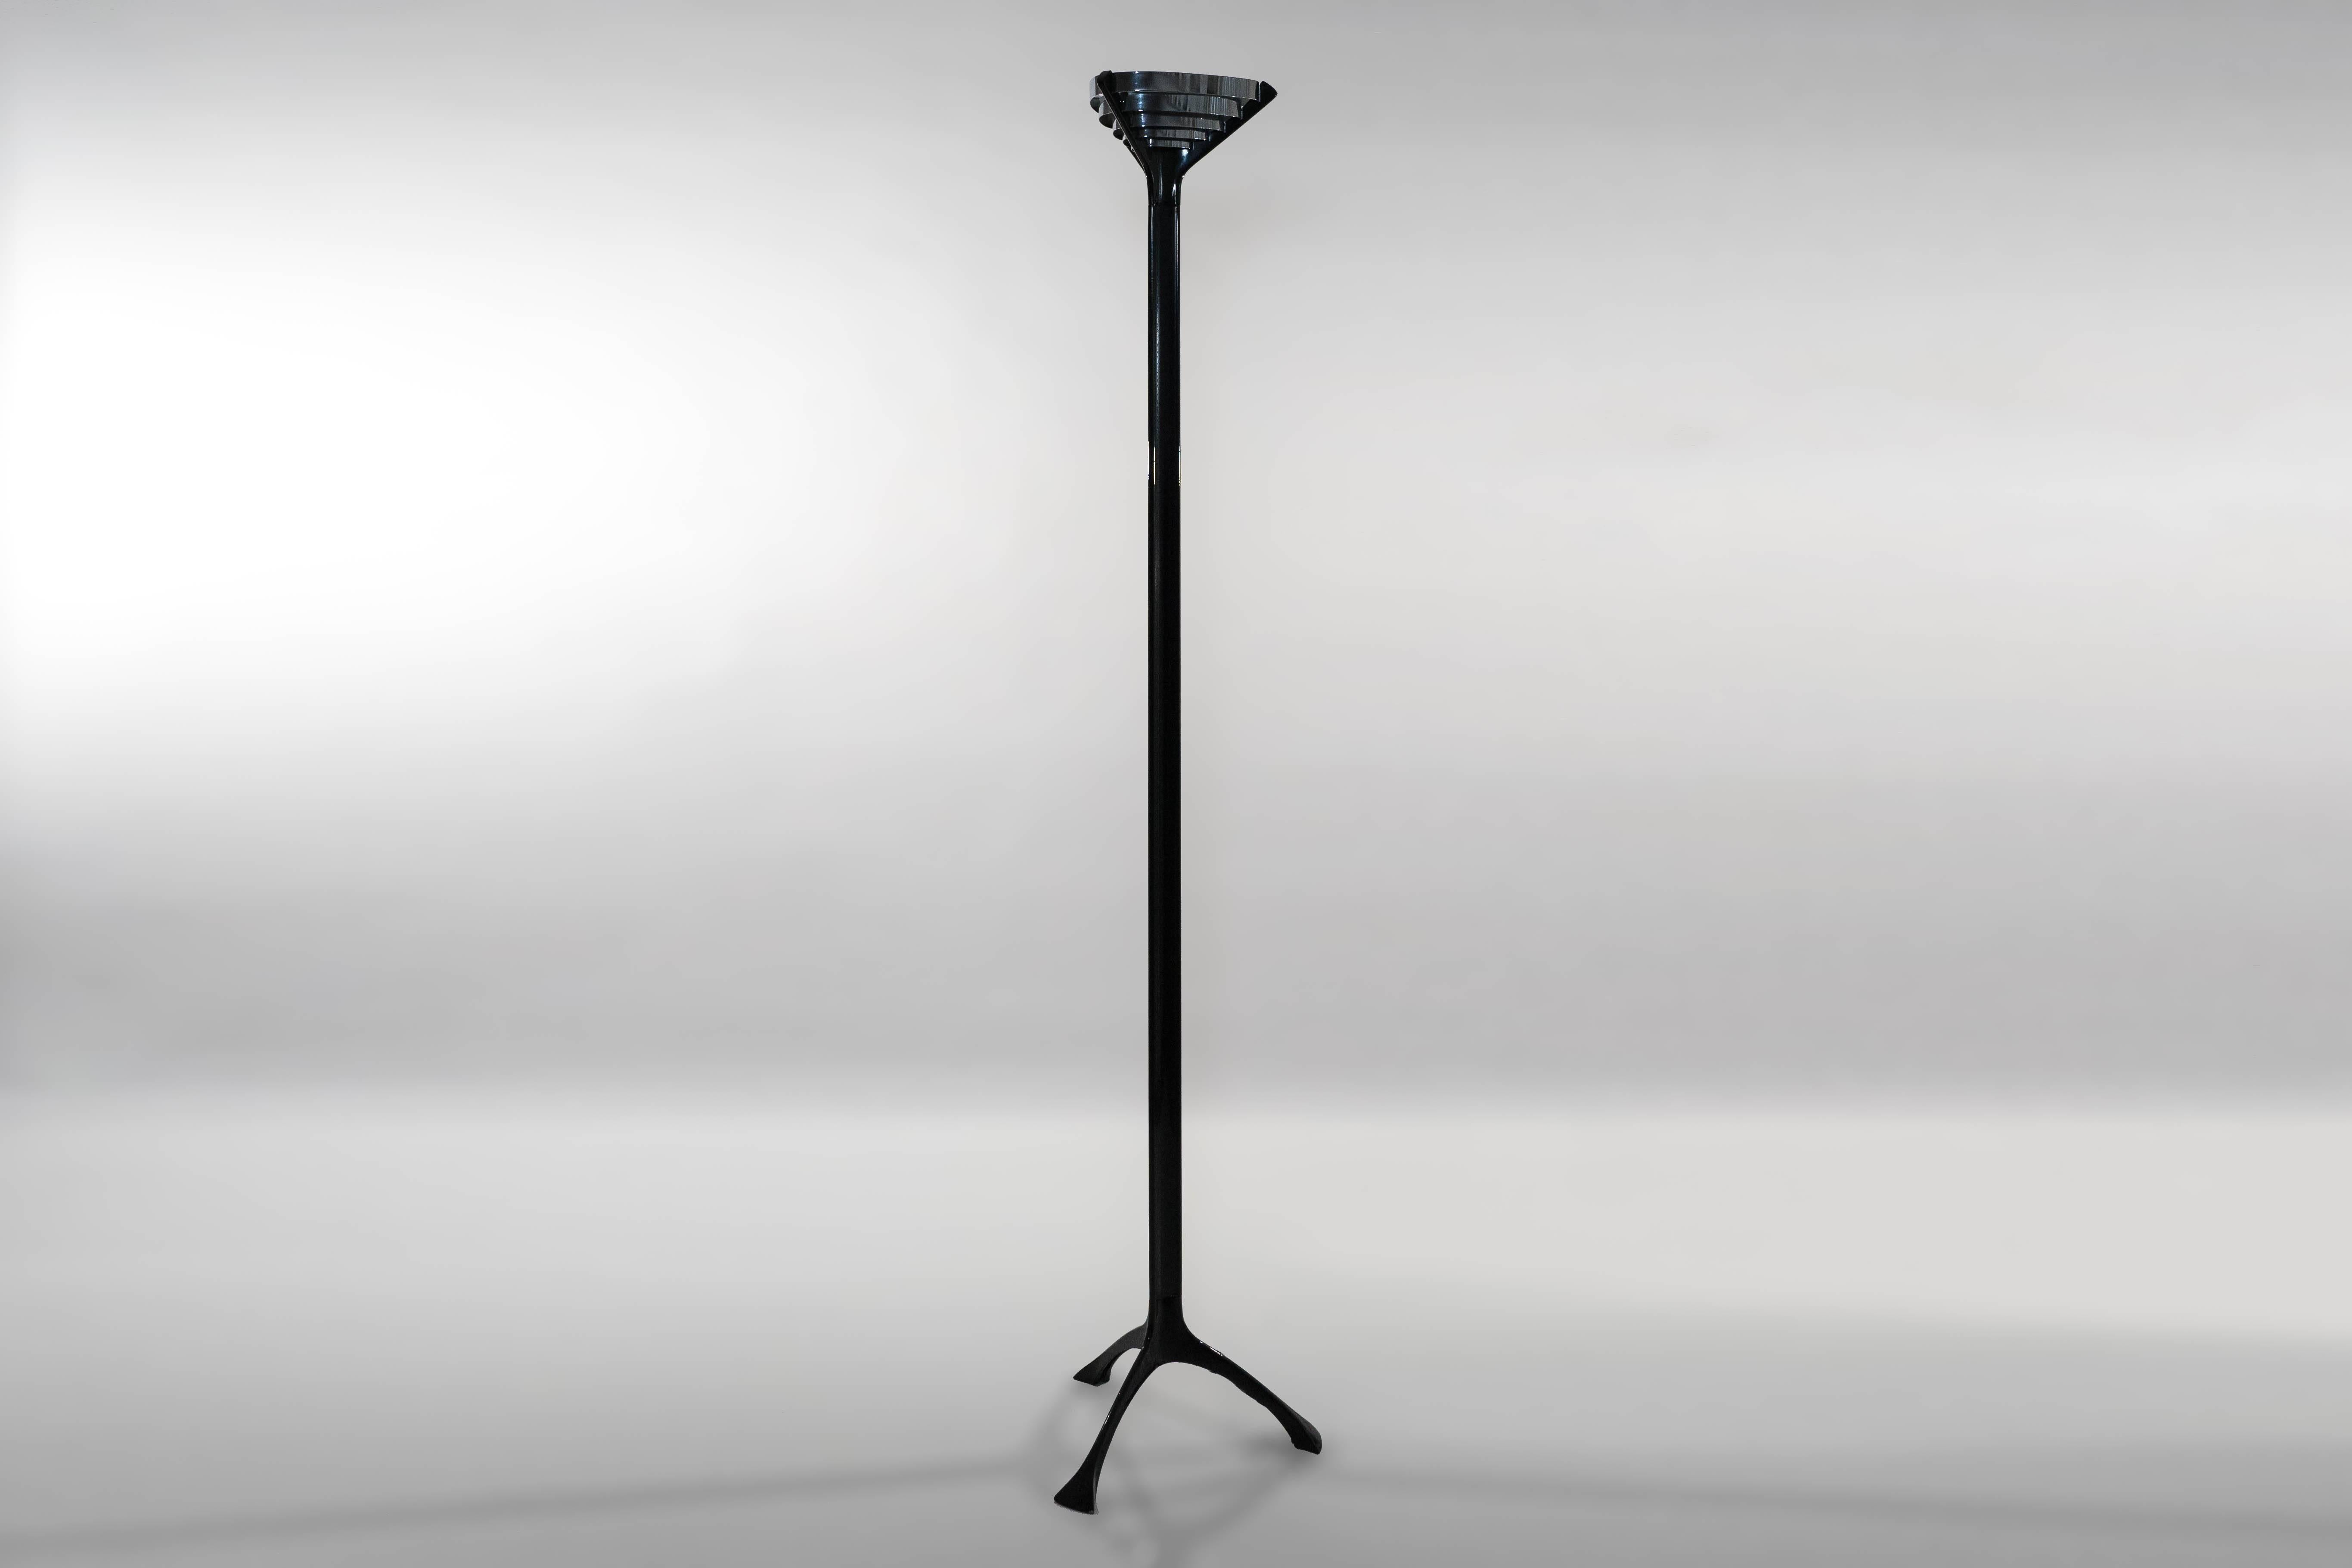 An effortlessly sleek floor lamp designed by Mangiarotti for Skipper Pollux in 1988. Three separate black lacquered aluminum elements (the tripod base, central stem and crown) are welded together to create a beautiful floor lamp with a small